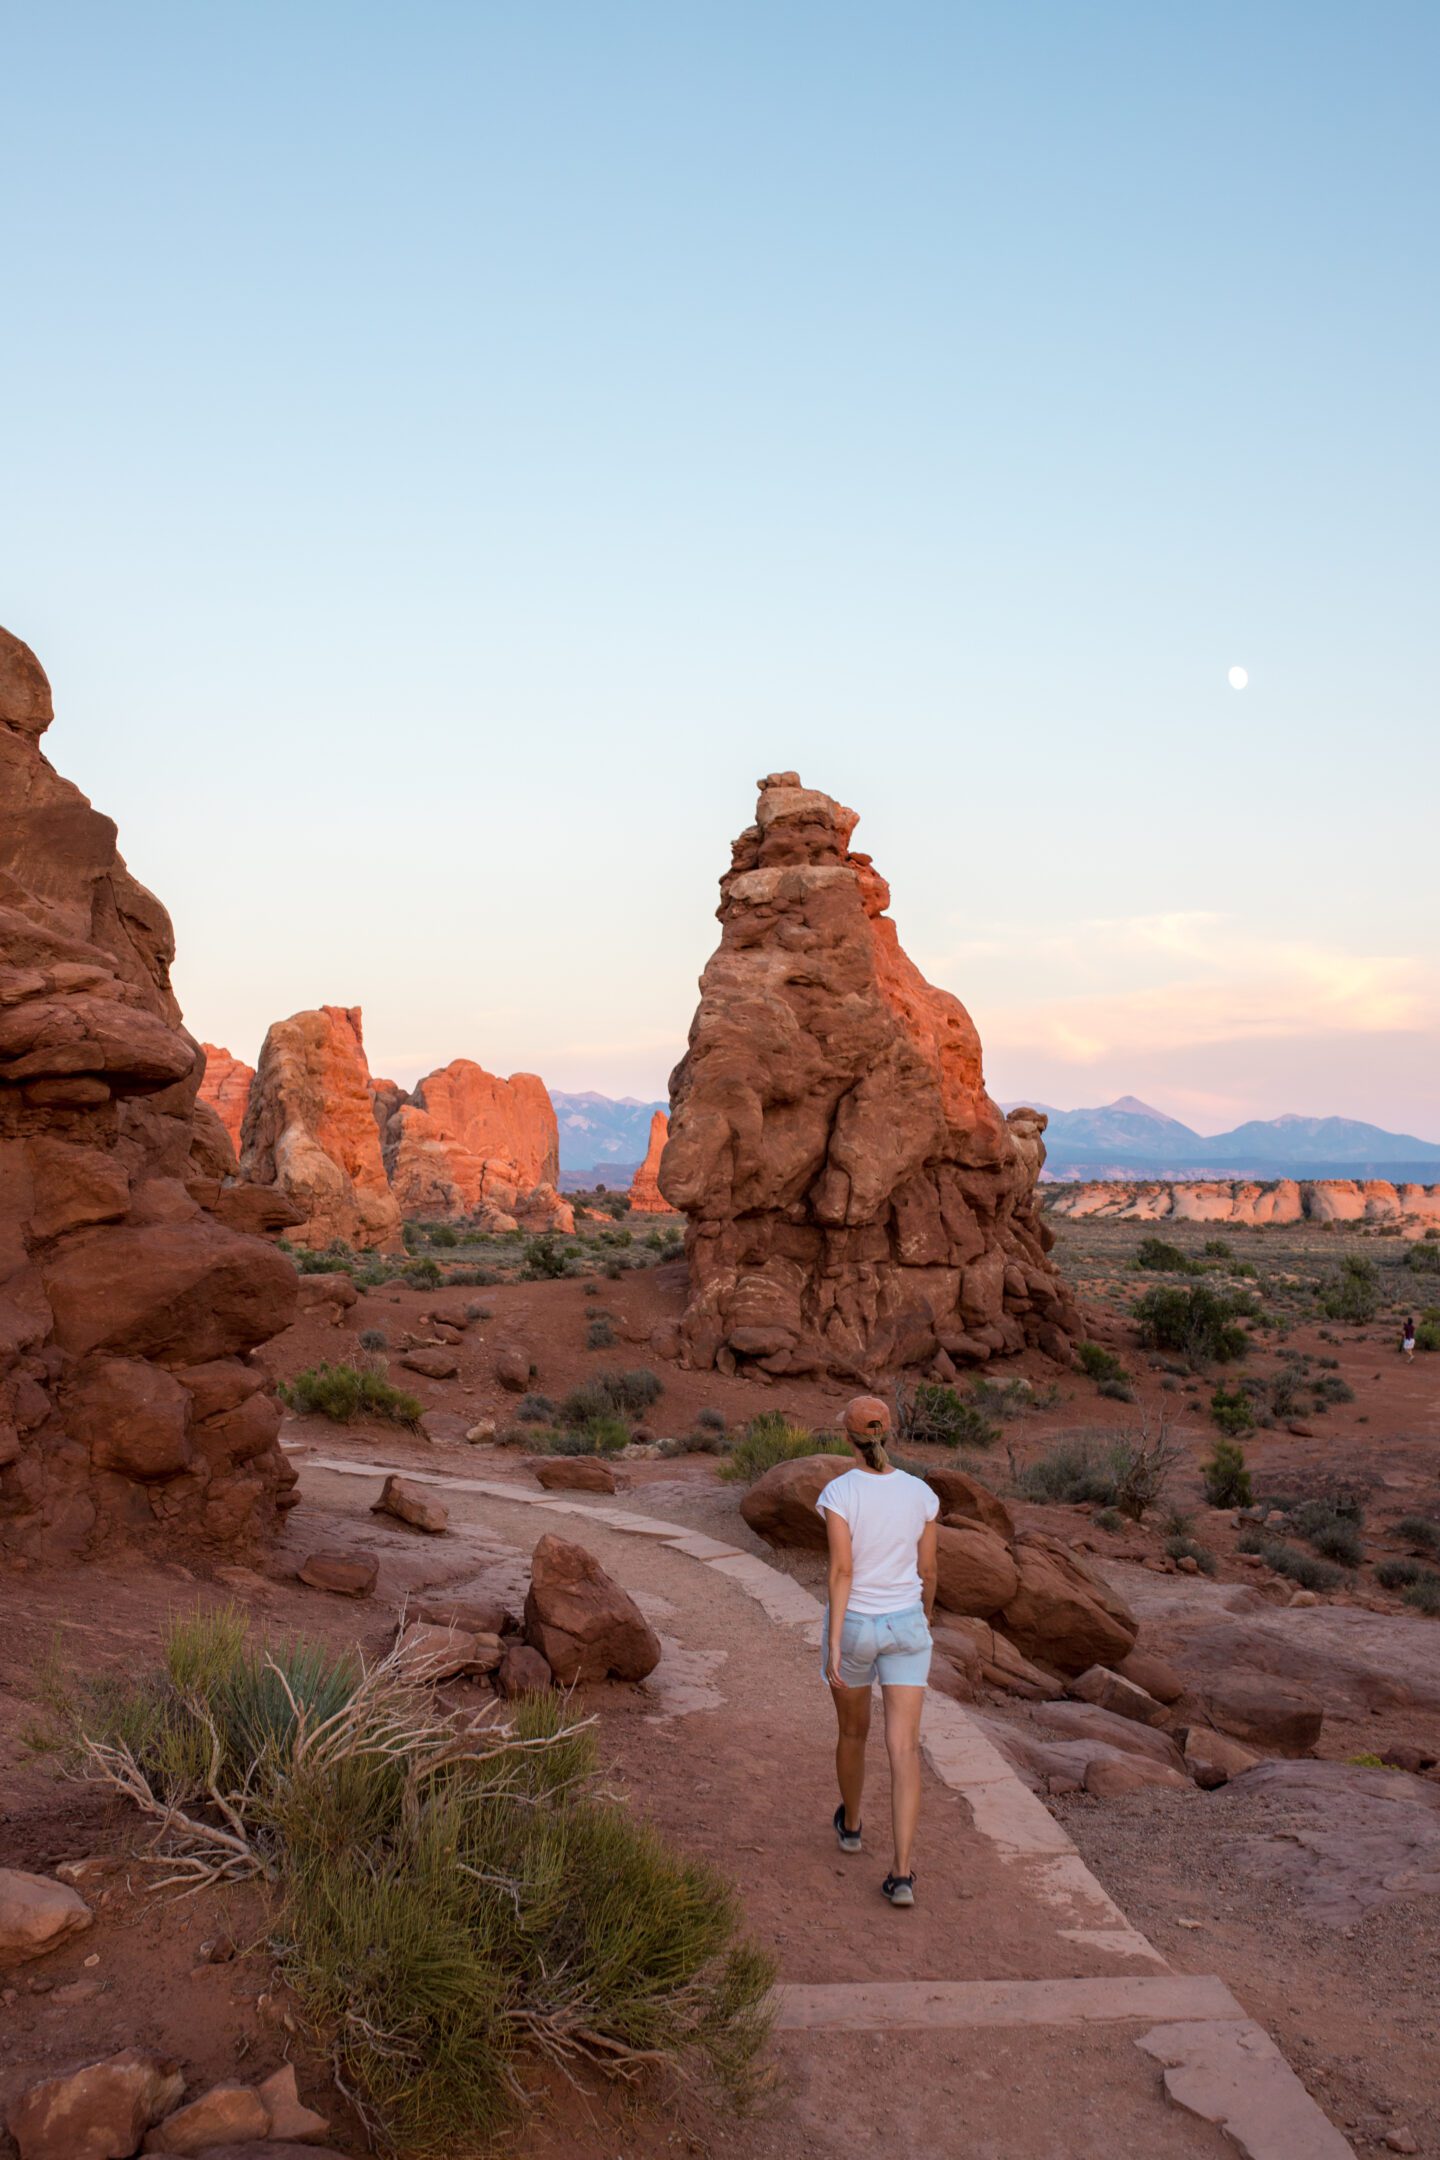 A girl walking on a sandy path between tall rock formations